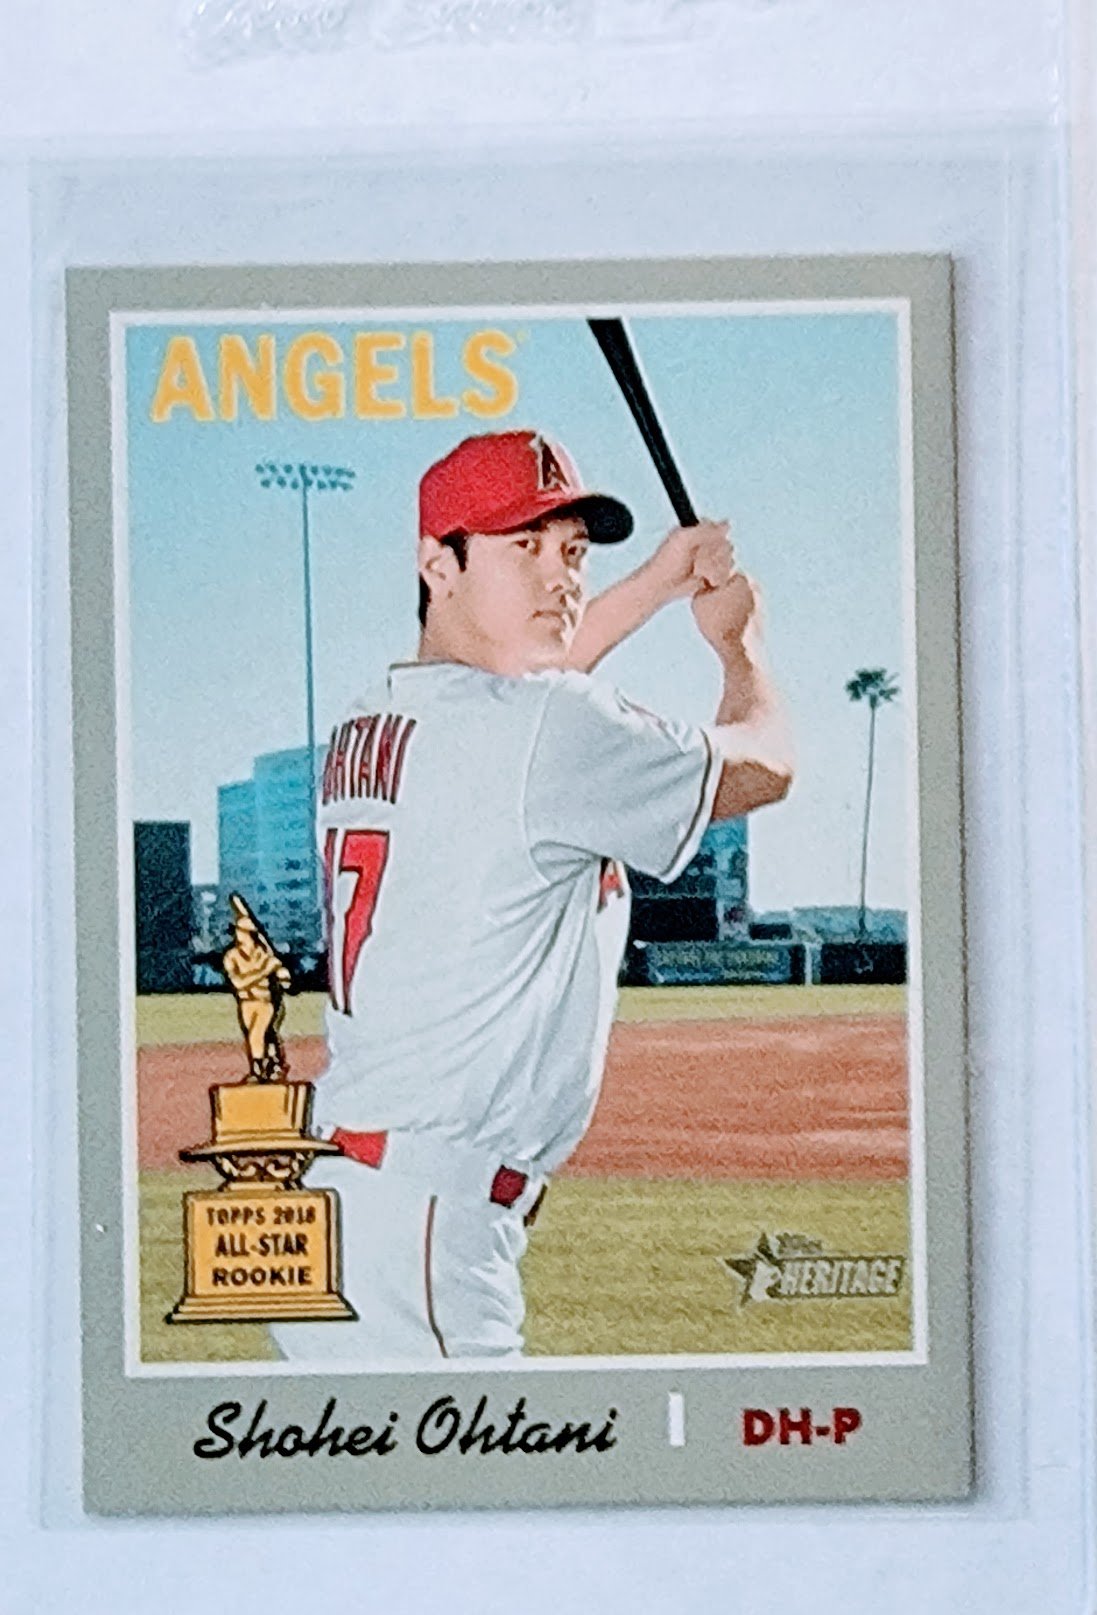 2019 Topps Heritage Shohei Ohtani All Star Rookie Baseball Trading Card TPTV simple Xclusive Collectibles   